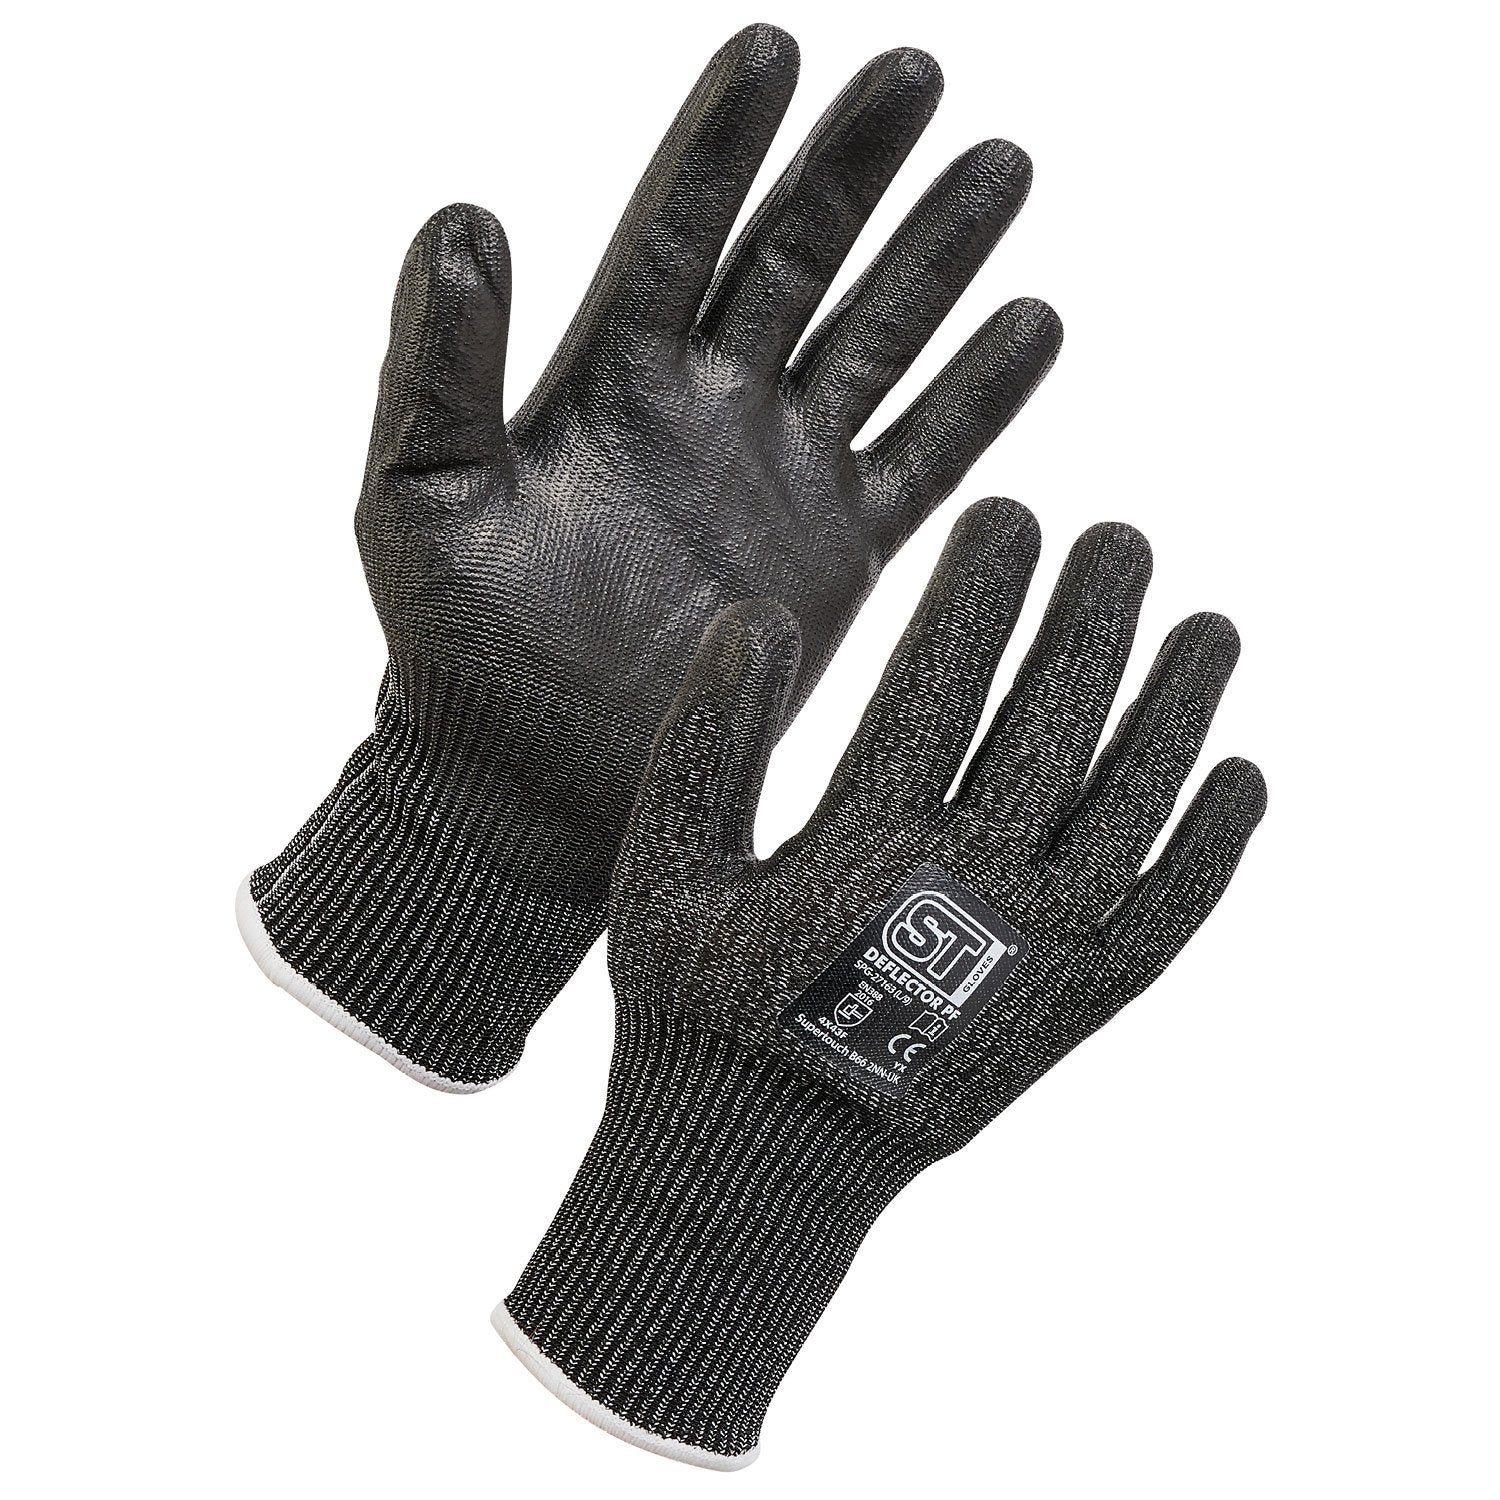 Supertouch Supertouch Deflector PF Cut Resistant Gloves - G107